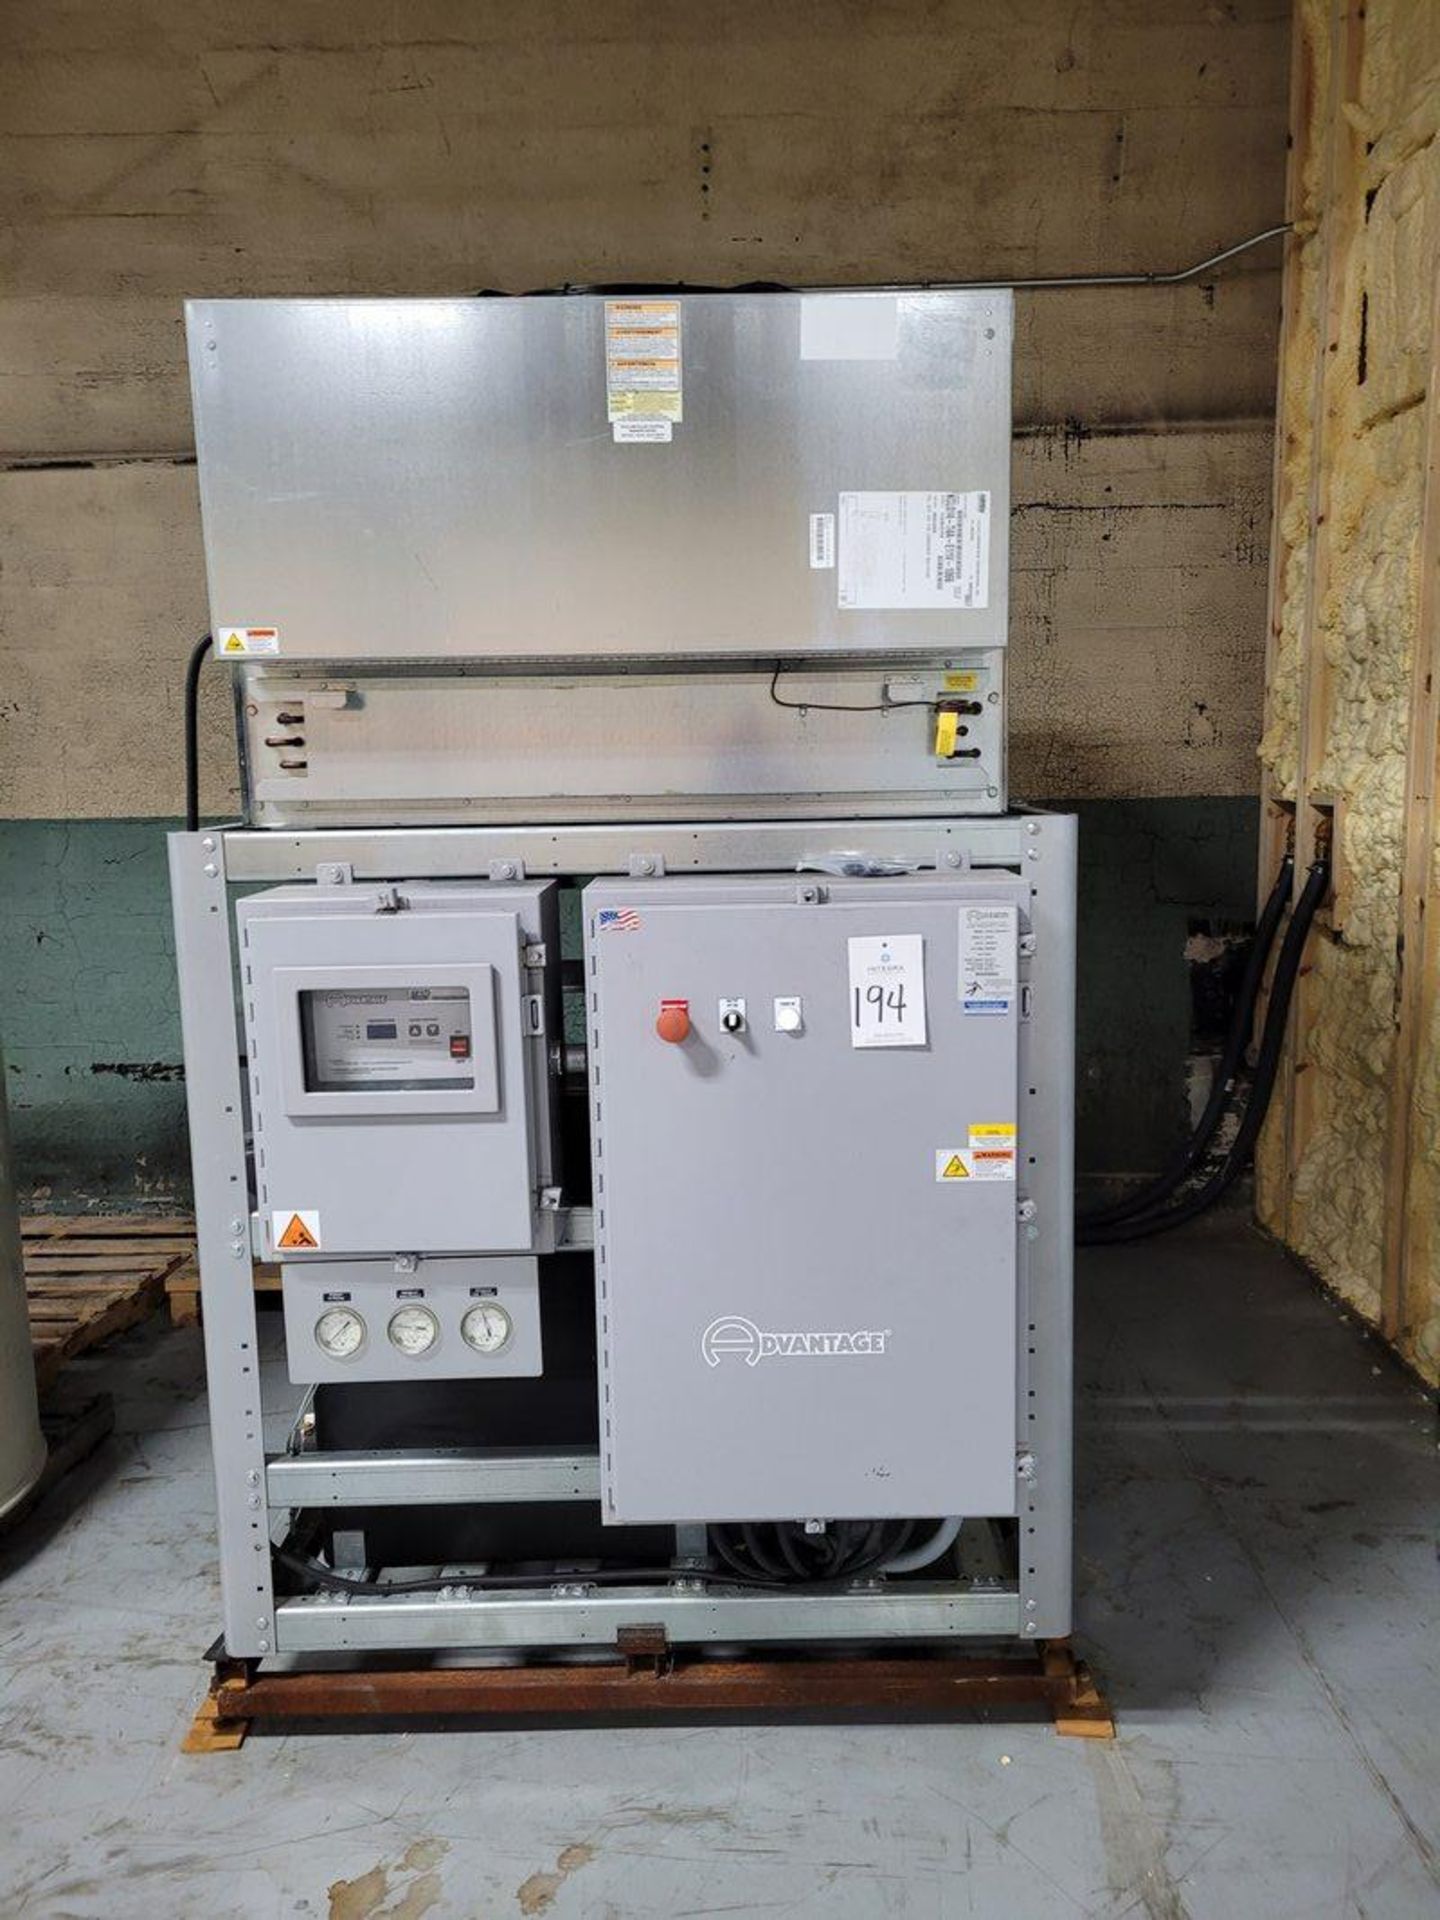 Advantage OACS-7.5S-M1D-1P Chiller, S/N 157637, 2017, with M1D Digital Scroll Chiller Control